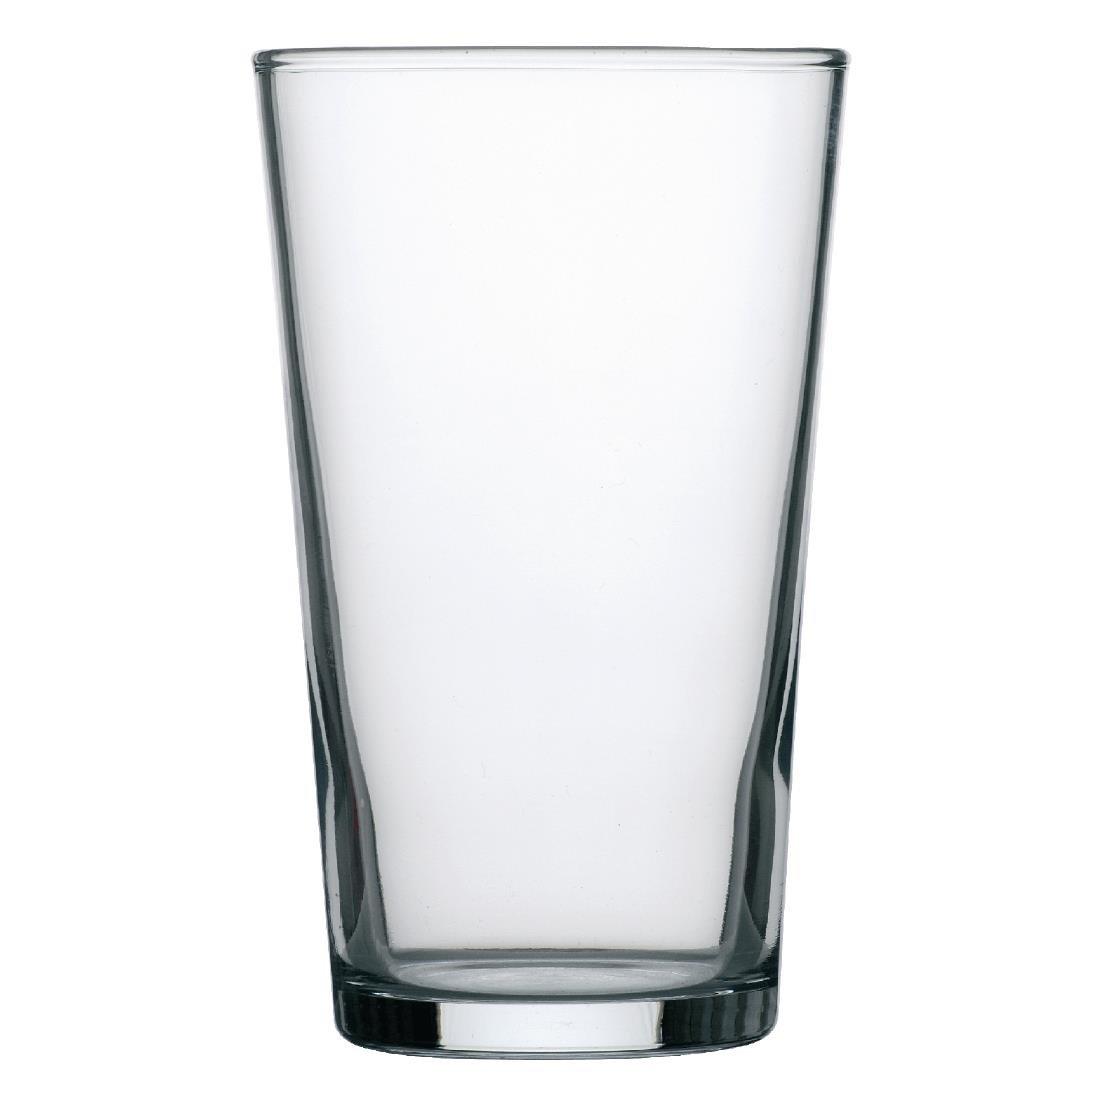 Y706 - Conical Beer Glass